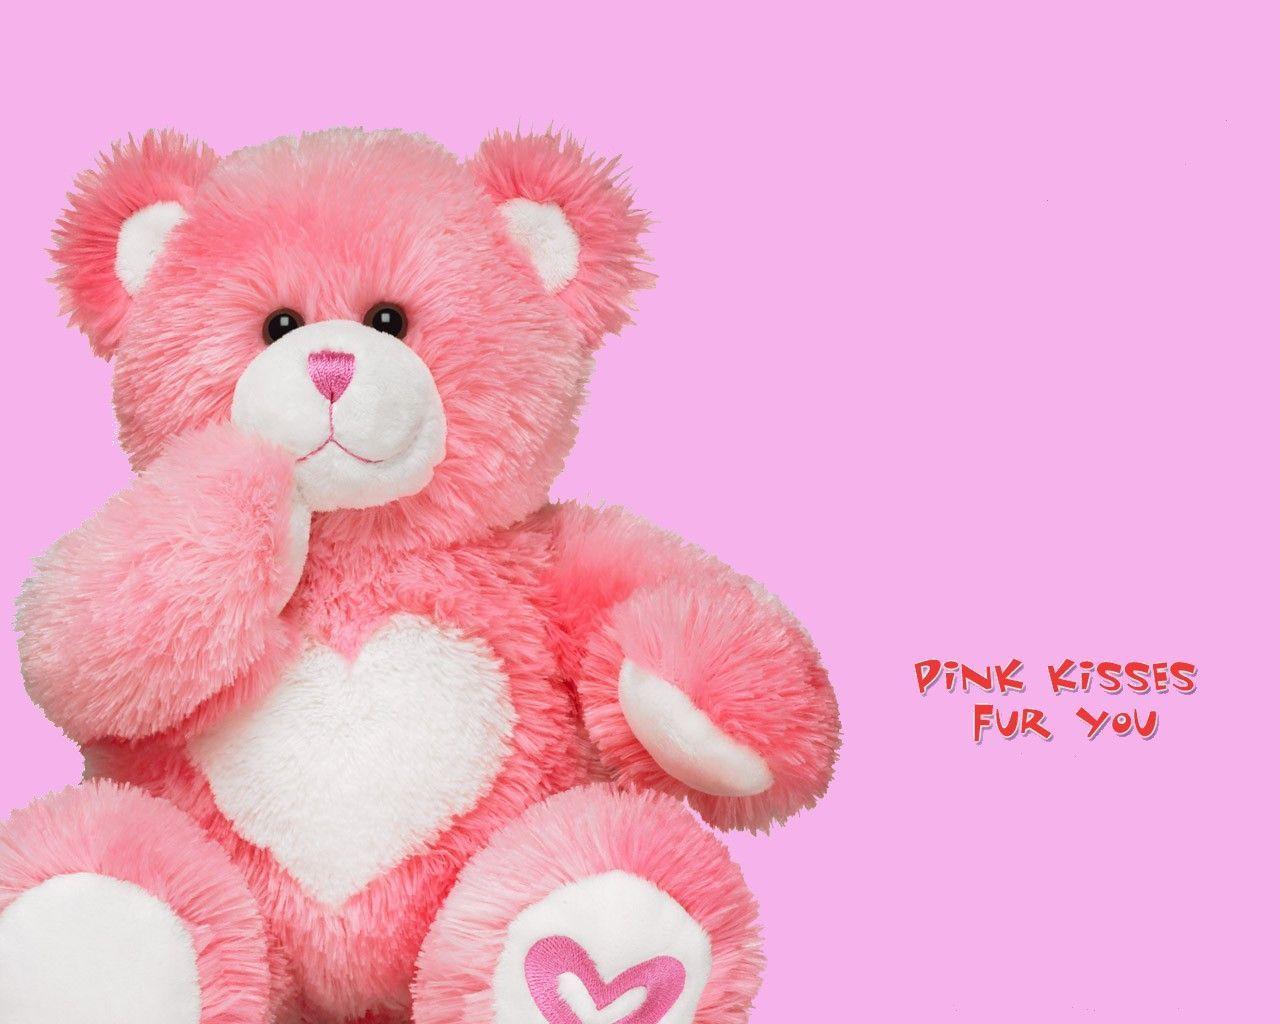 Pink Teddy Bear Wallpapers - Top Free Pink Teddy Bear Backgrounds ...